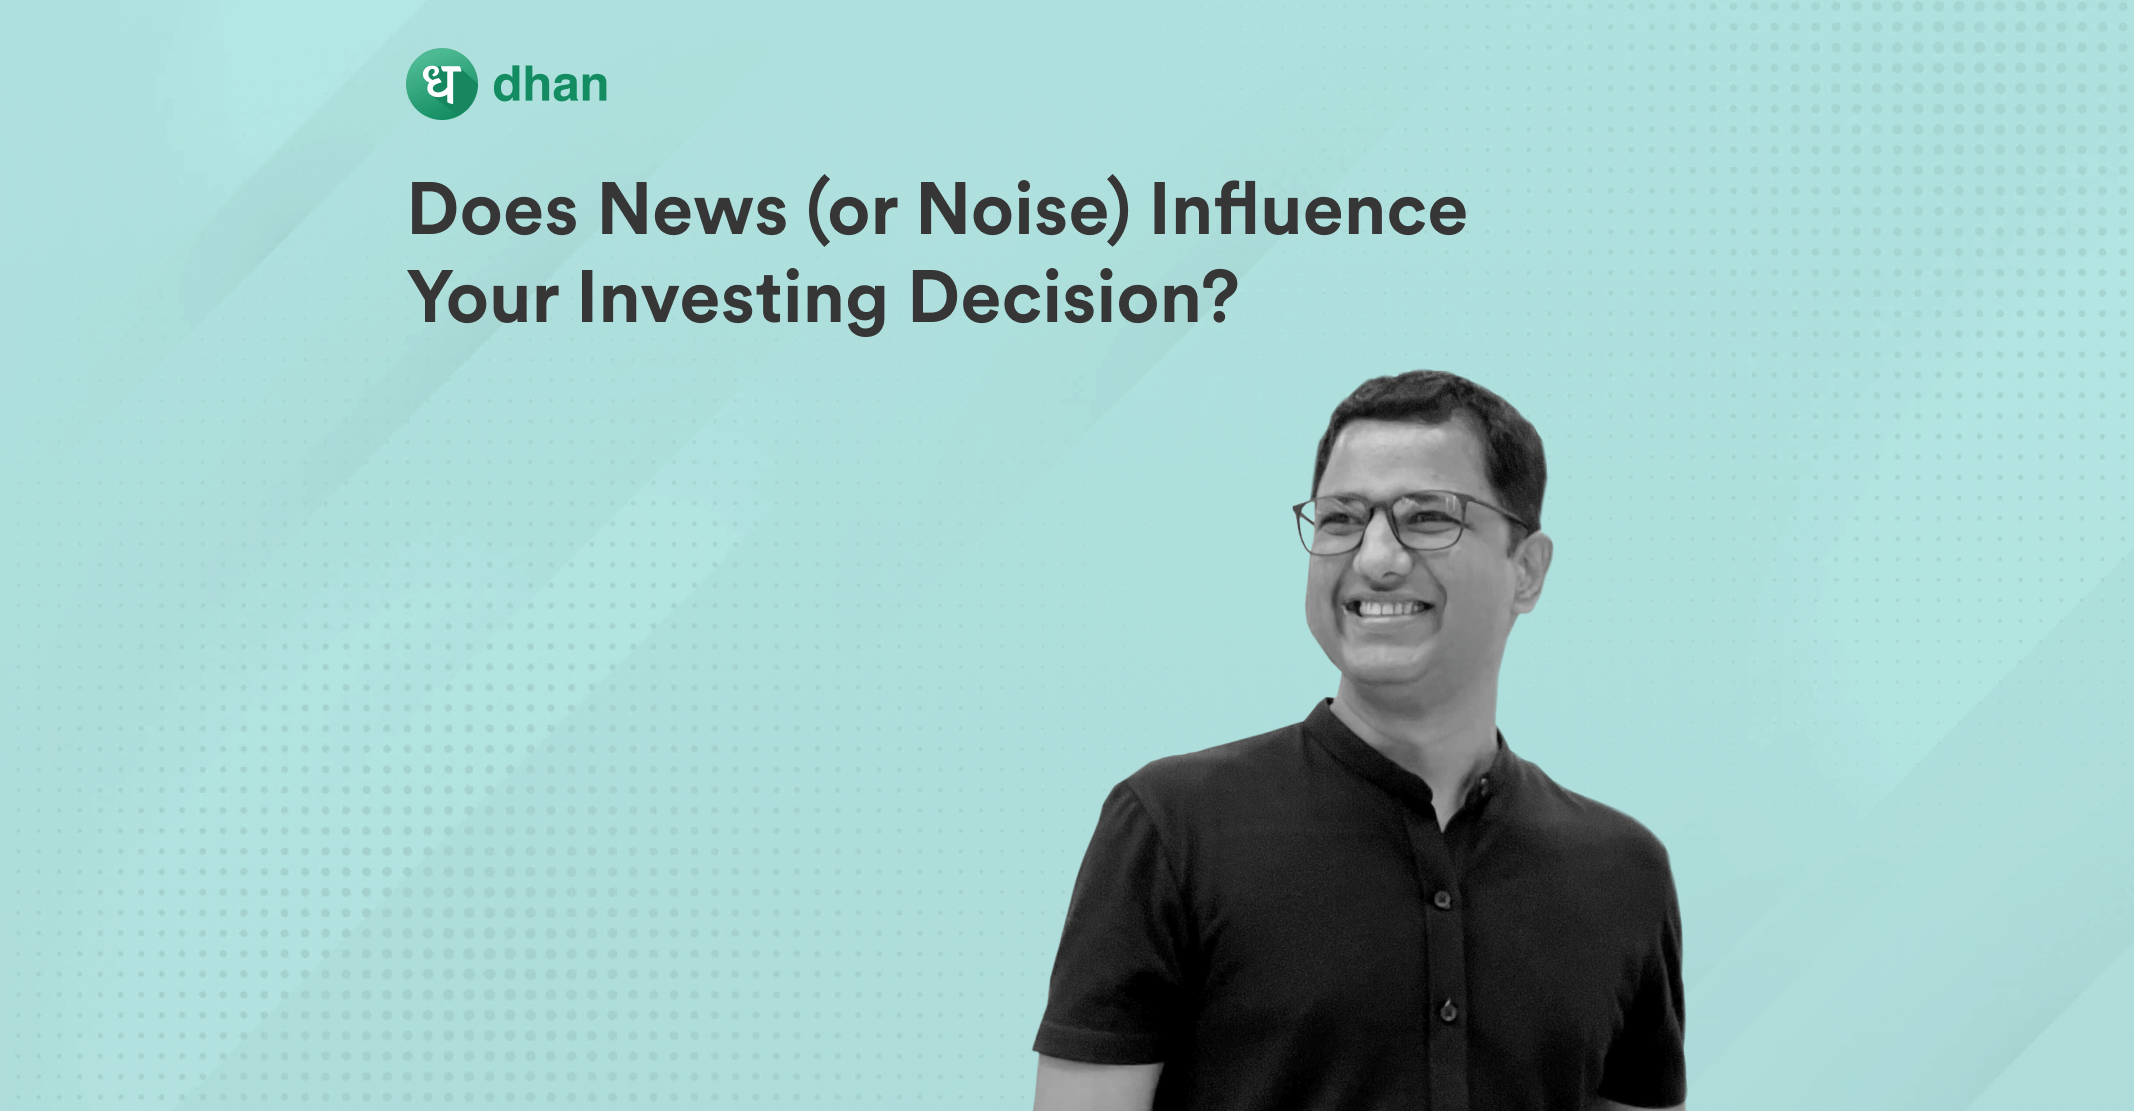 Does News (or Noise) Affect Your Investing Decisions